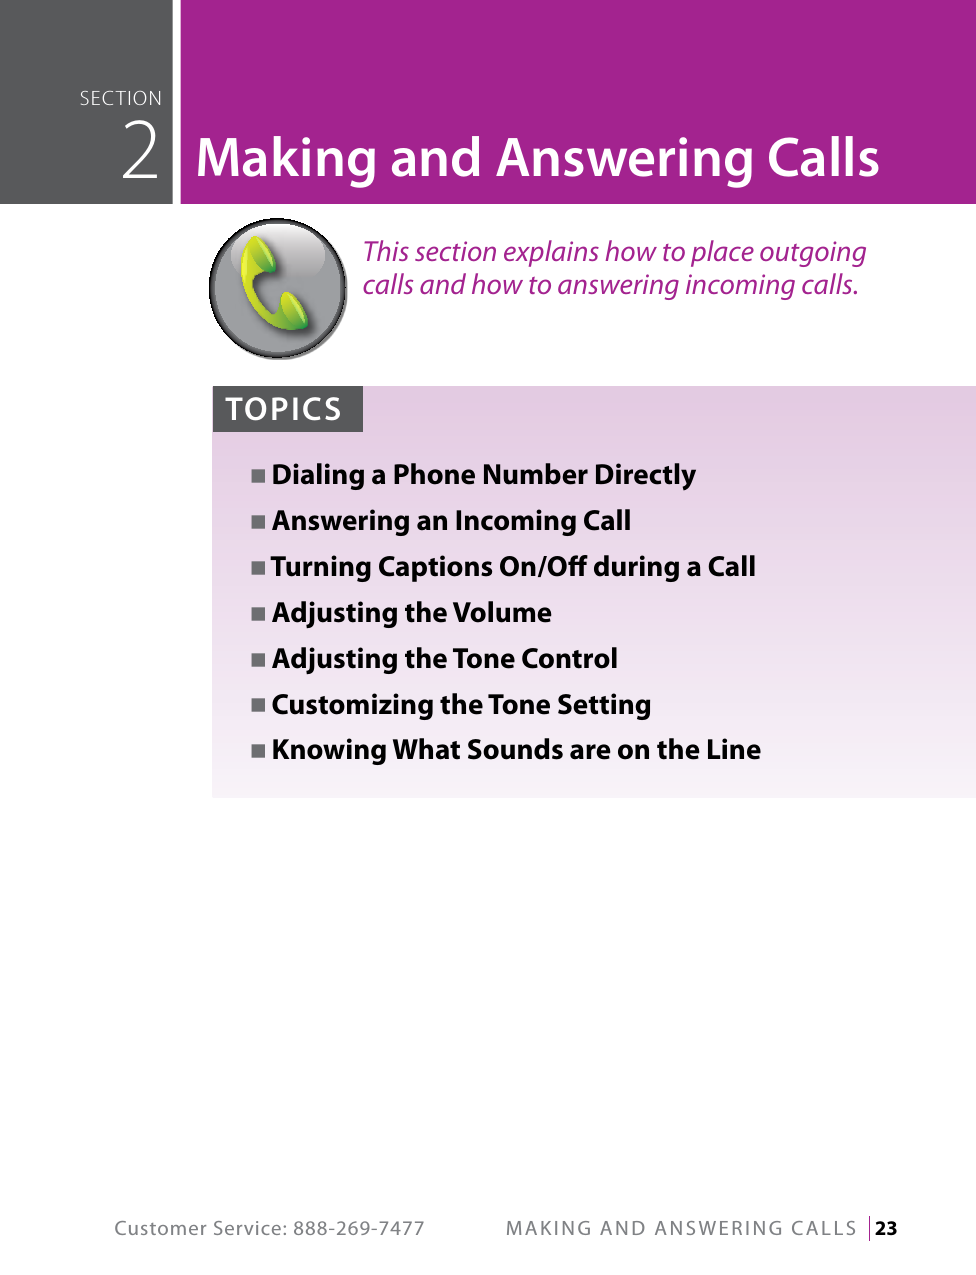 Customer Service: 888-269-7477  MAKINg AND ANSWERINg CALLS   23This section explains how to place outgoing calls and how to answering incoming calls.seCTiOn  2Making and Answering CallsTOPICSN Dialing a Phone Number DirectlyN Answering an Incoming CallN Turning Captions On/O during a CallN Adjusting the VolumeN Adjusting the Tone ControlN Customizing the Tone SettingN Knowing What Sounds are on the Line